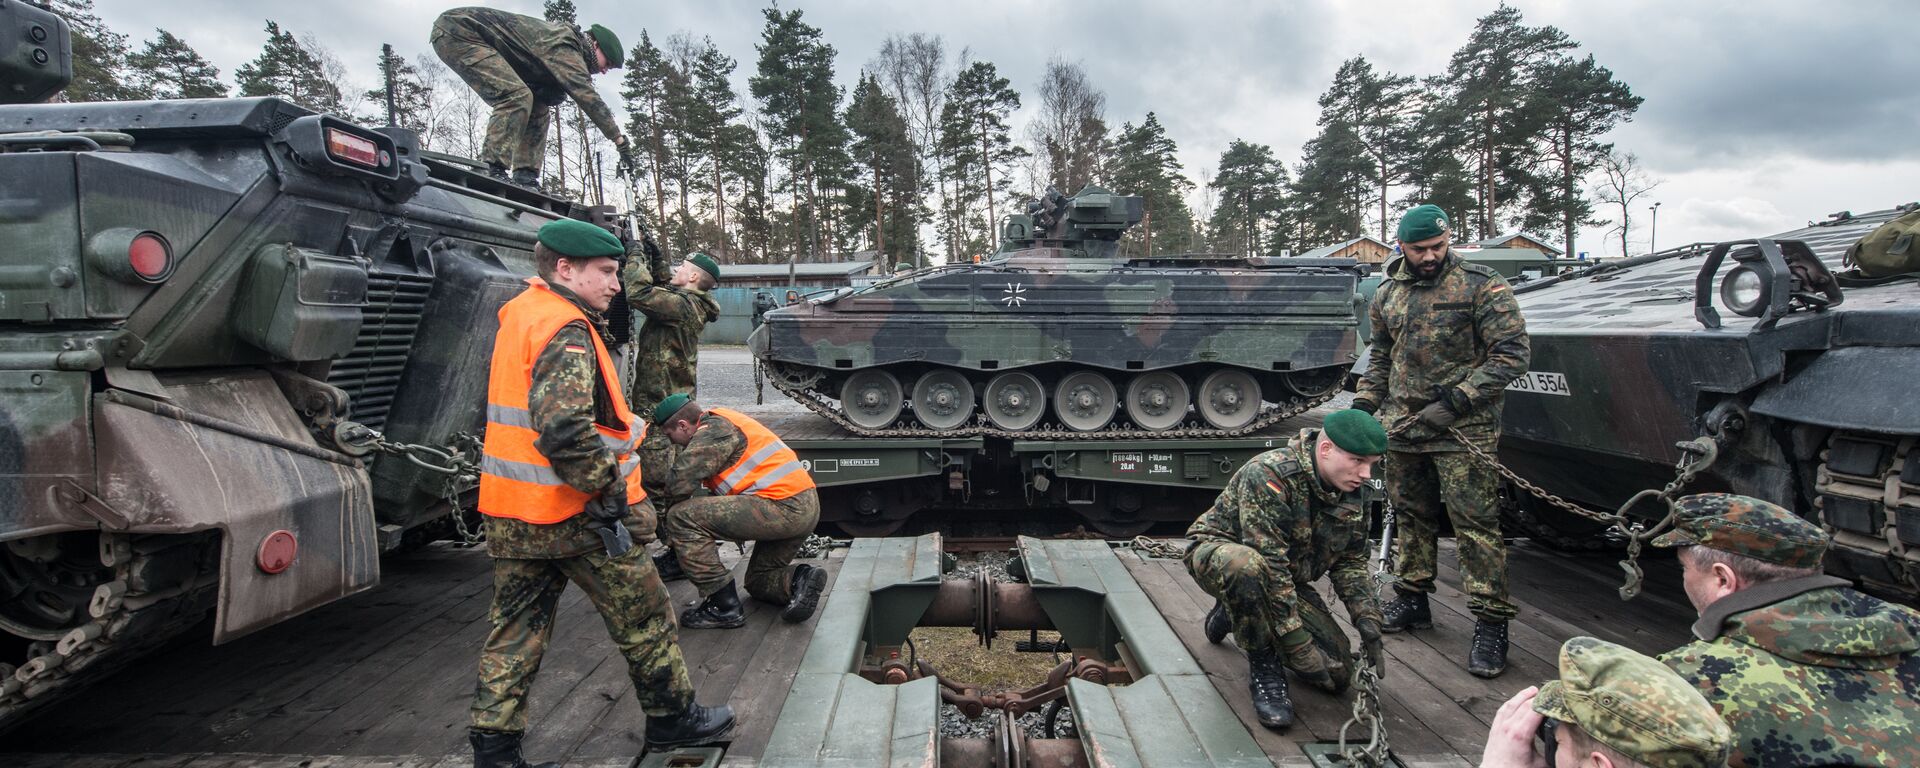 German soldiers load armored vehicles of the type Marder on a train at the troop exercise area in Grafenwoehr, southern Germany, on February 21, 2017. - اسپوتنیک افغانستان  , 1920, 08.01.2023